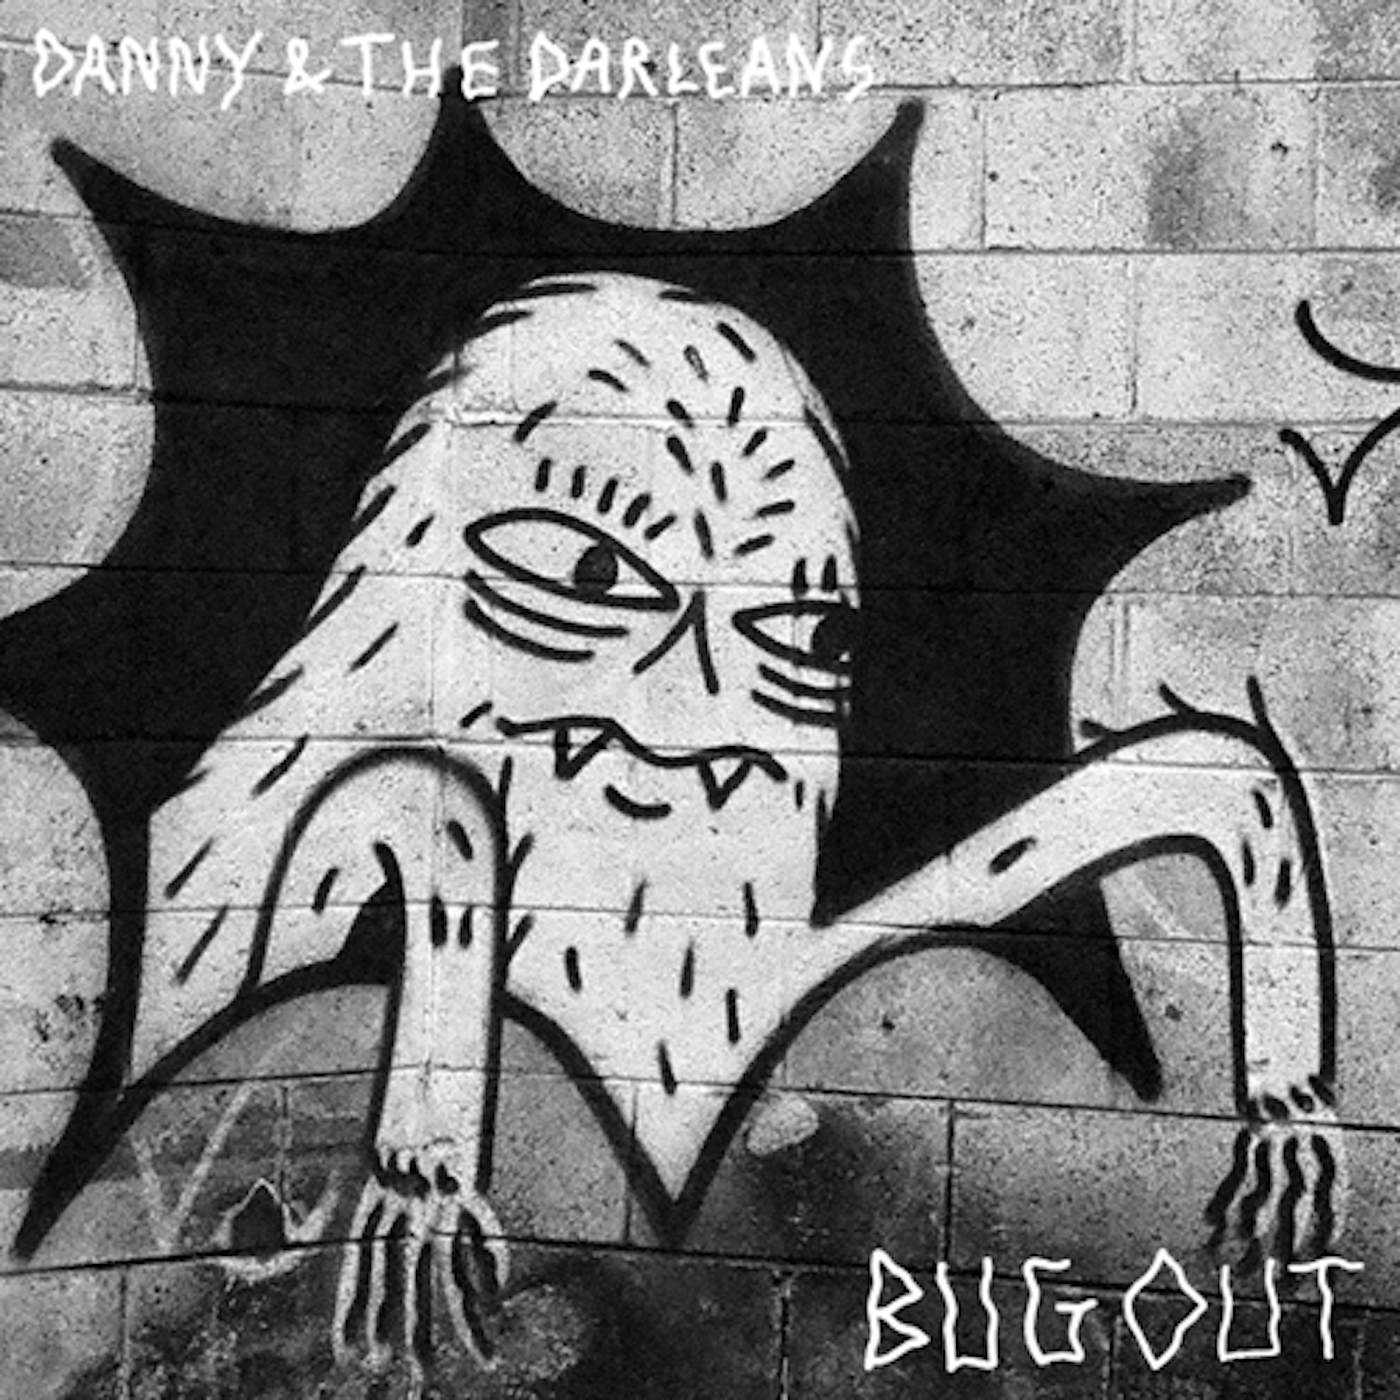 Danny and the Darleans BUG OUT CD